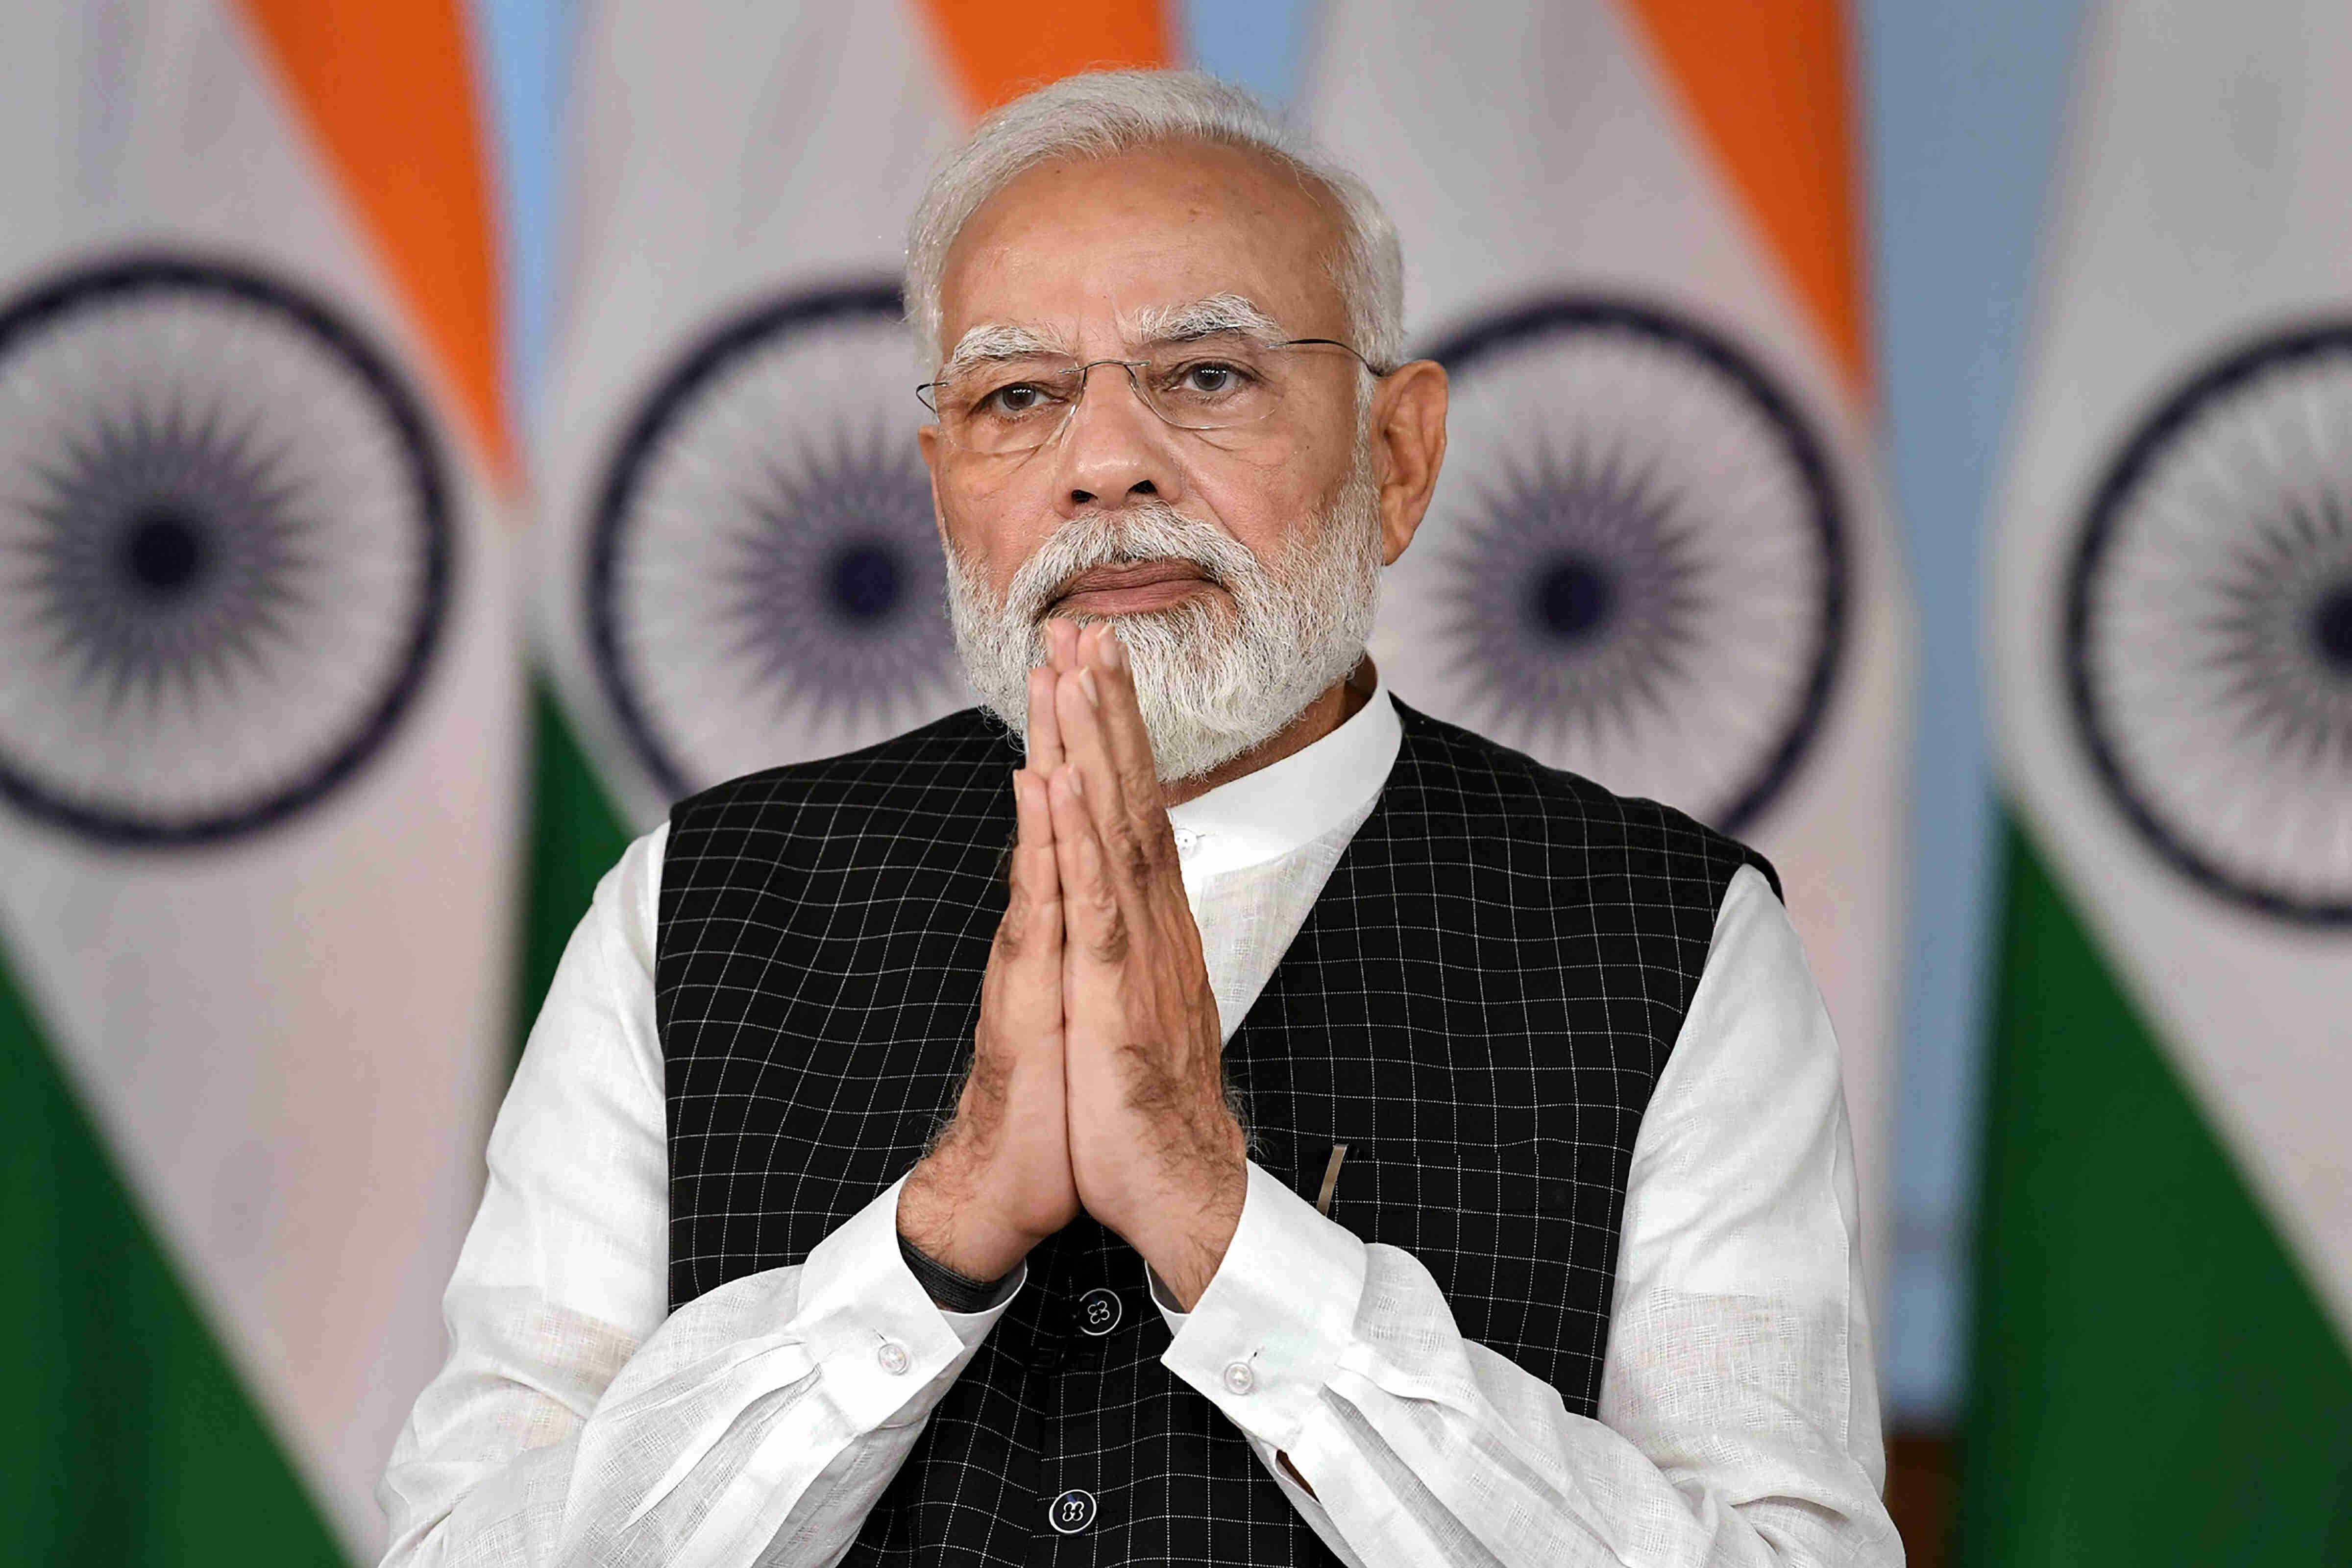 PM Modis total assets rise by Rs 26 lakh to Rs 2.23 crore; land holding donated